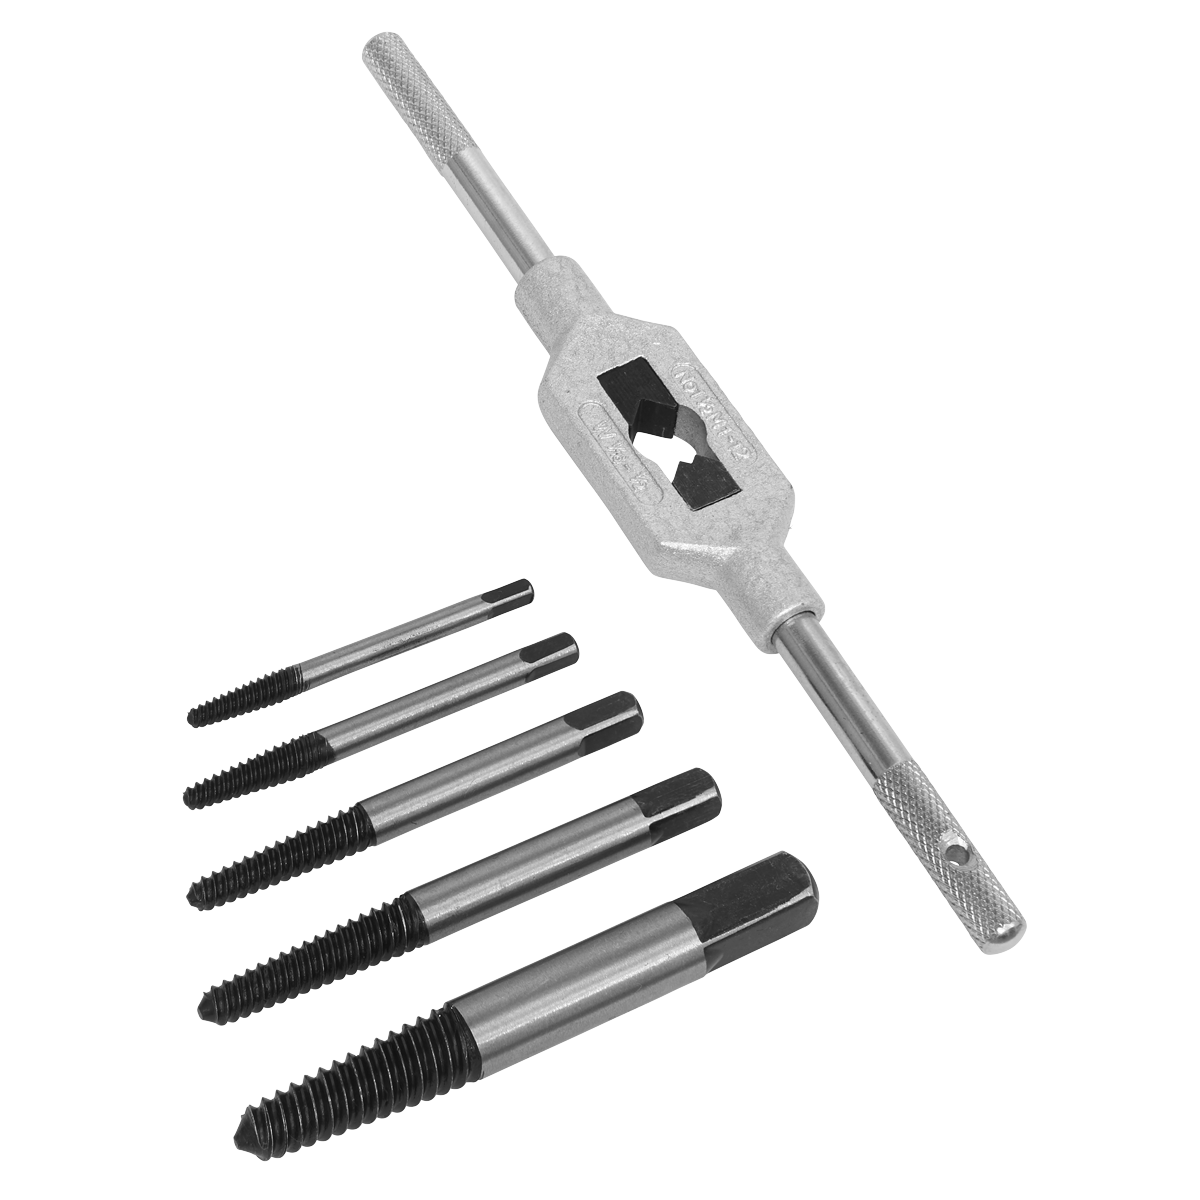 Sealey 6pc Helix Type Screw Extractor Set with Tap Wrench AK721